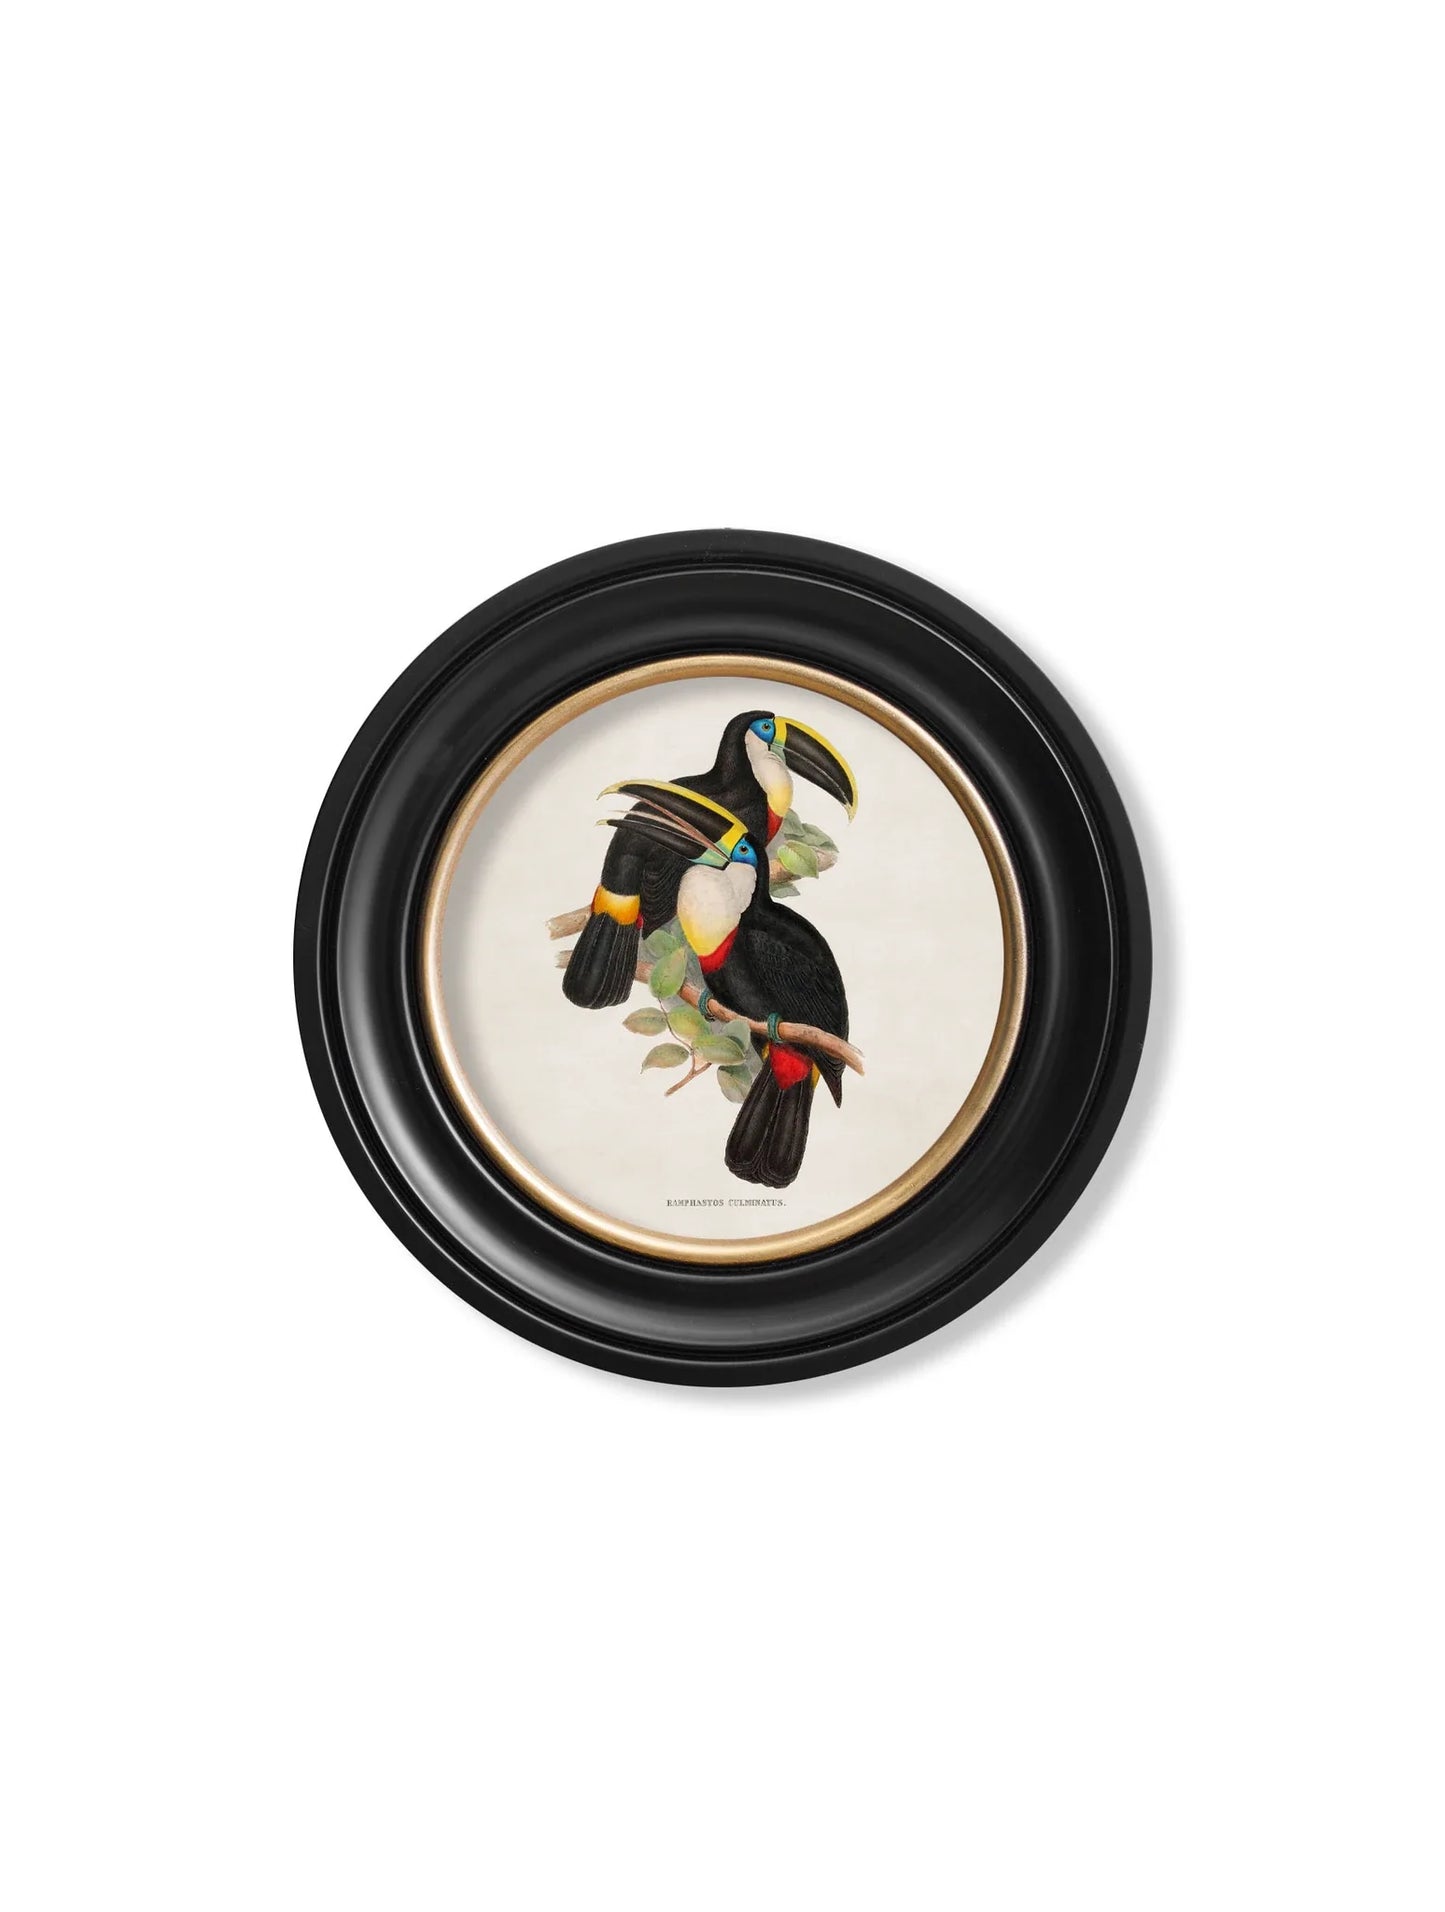 C.1848 Toucans - Round Frames for sale - Woodcock and Cavendish